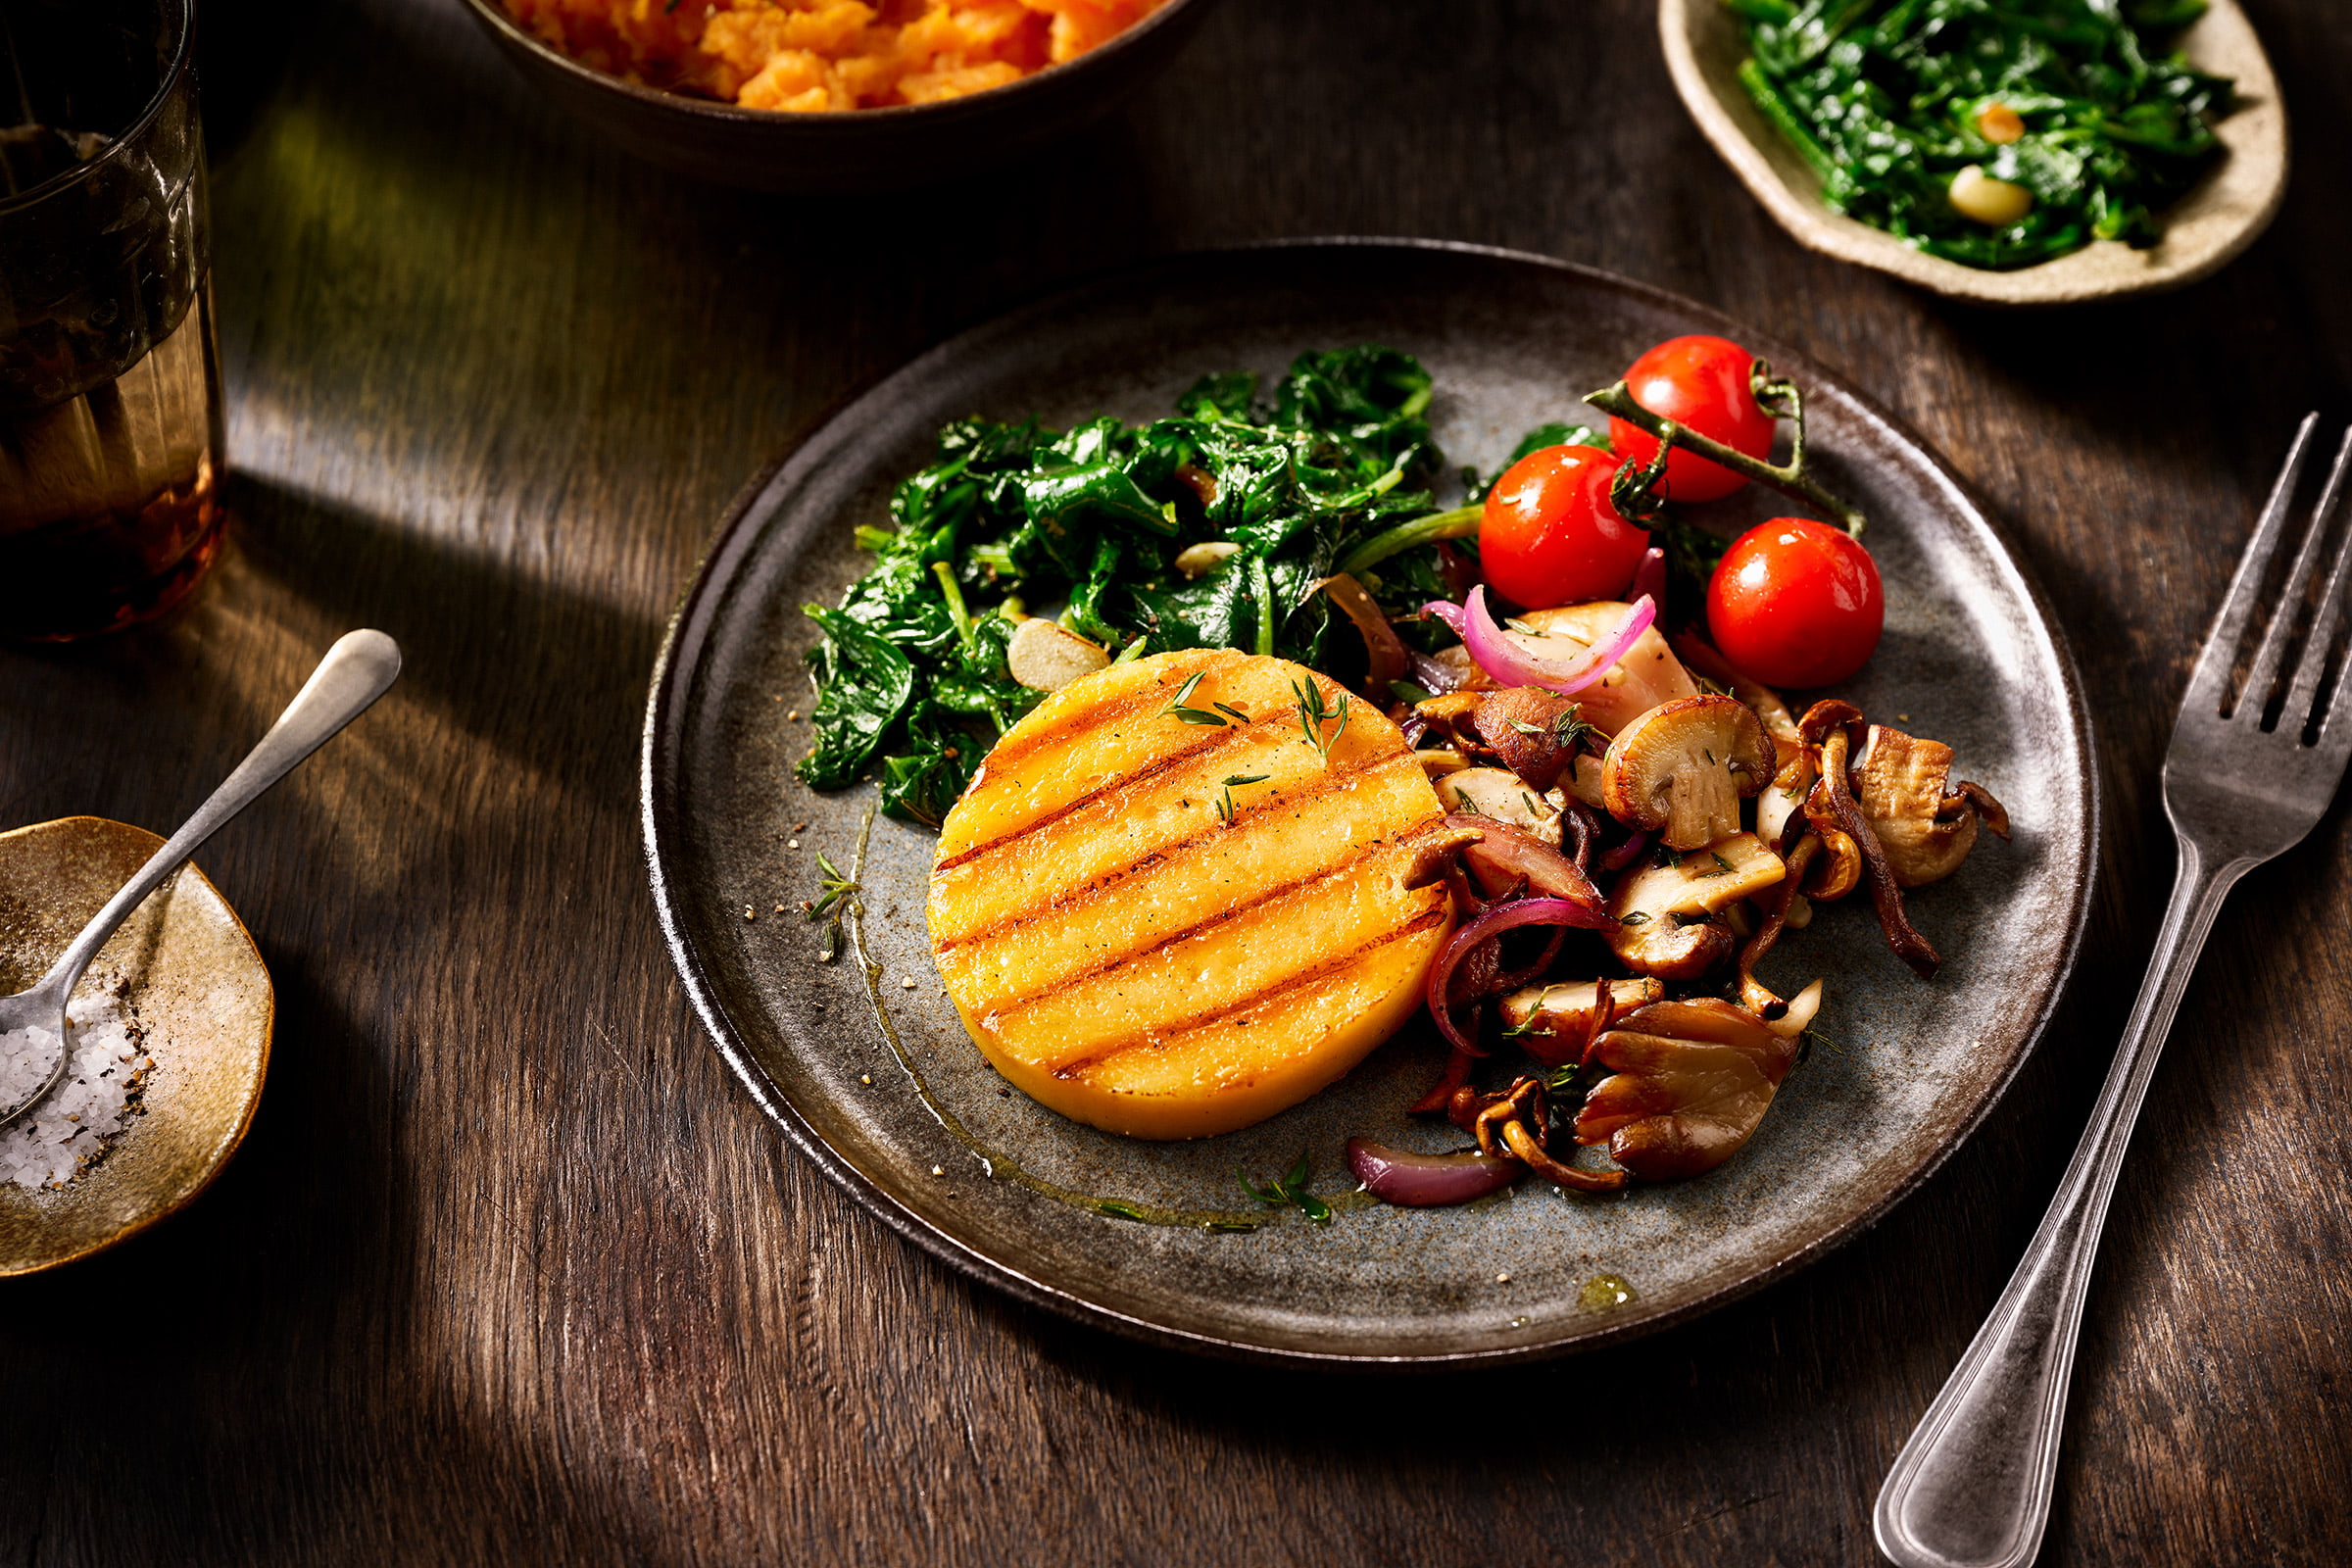 Tasty grill with spinach, mushrooms and sweet potato puree